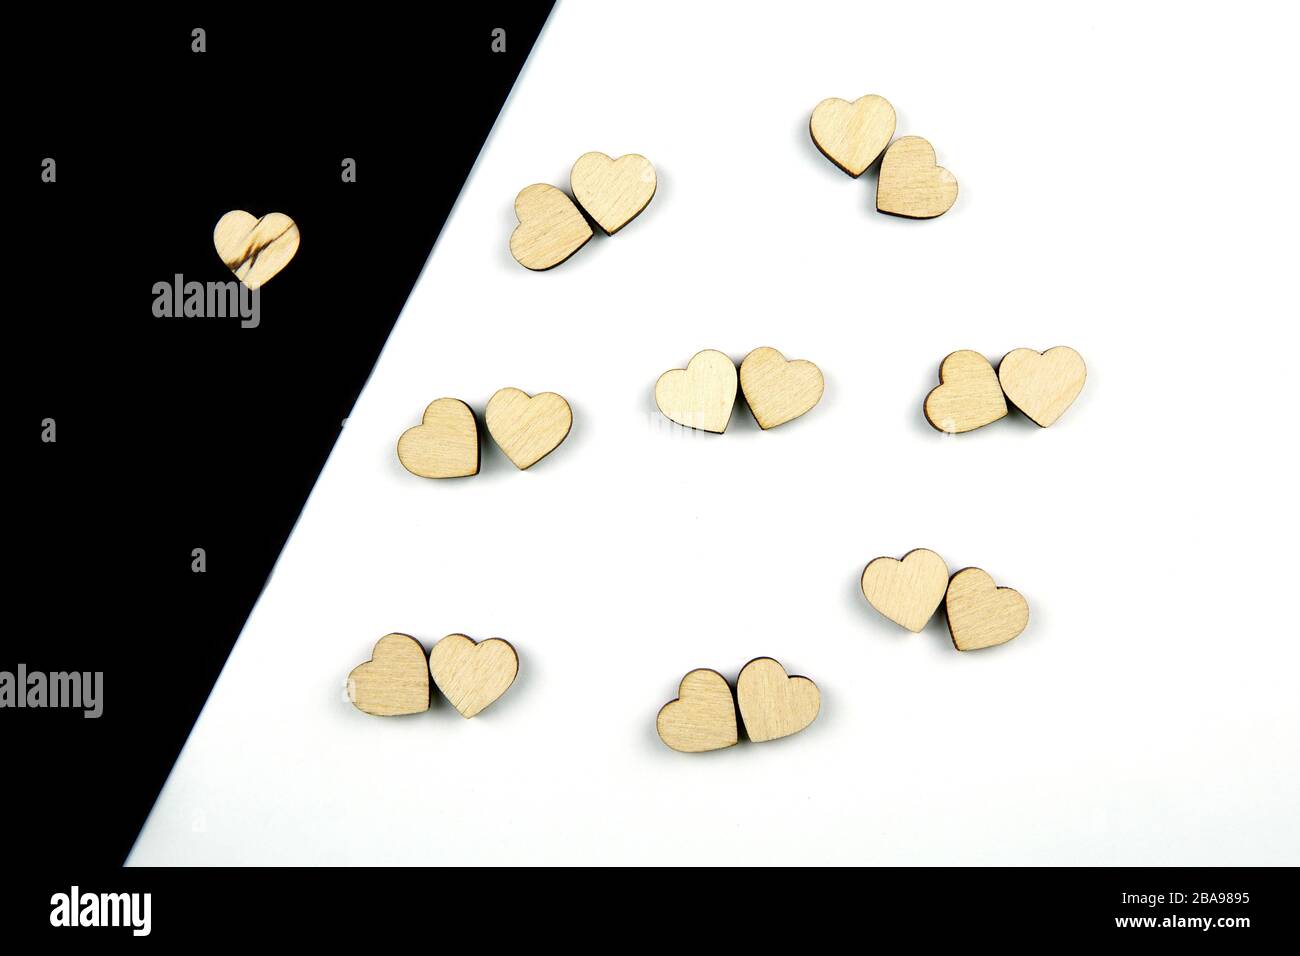 A lot of wooden hearts placed by couples on white background and one on black background. Concept of love and loneliness, isolation. Flat lay. Stock Photo